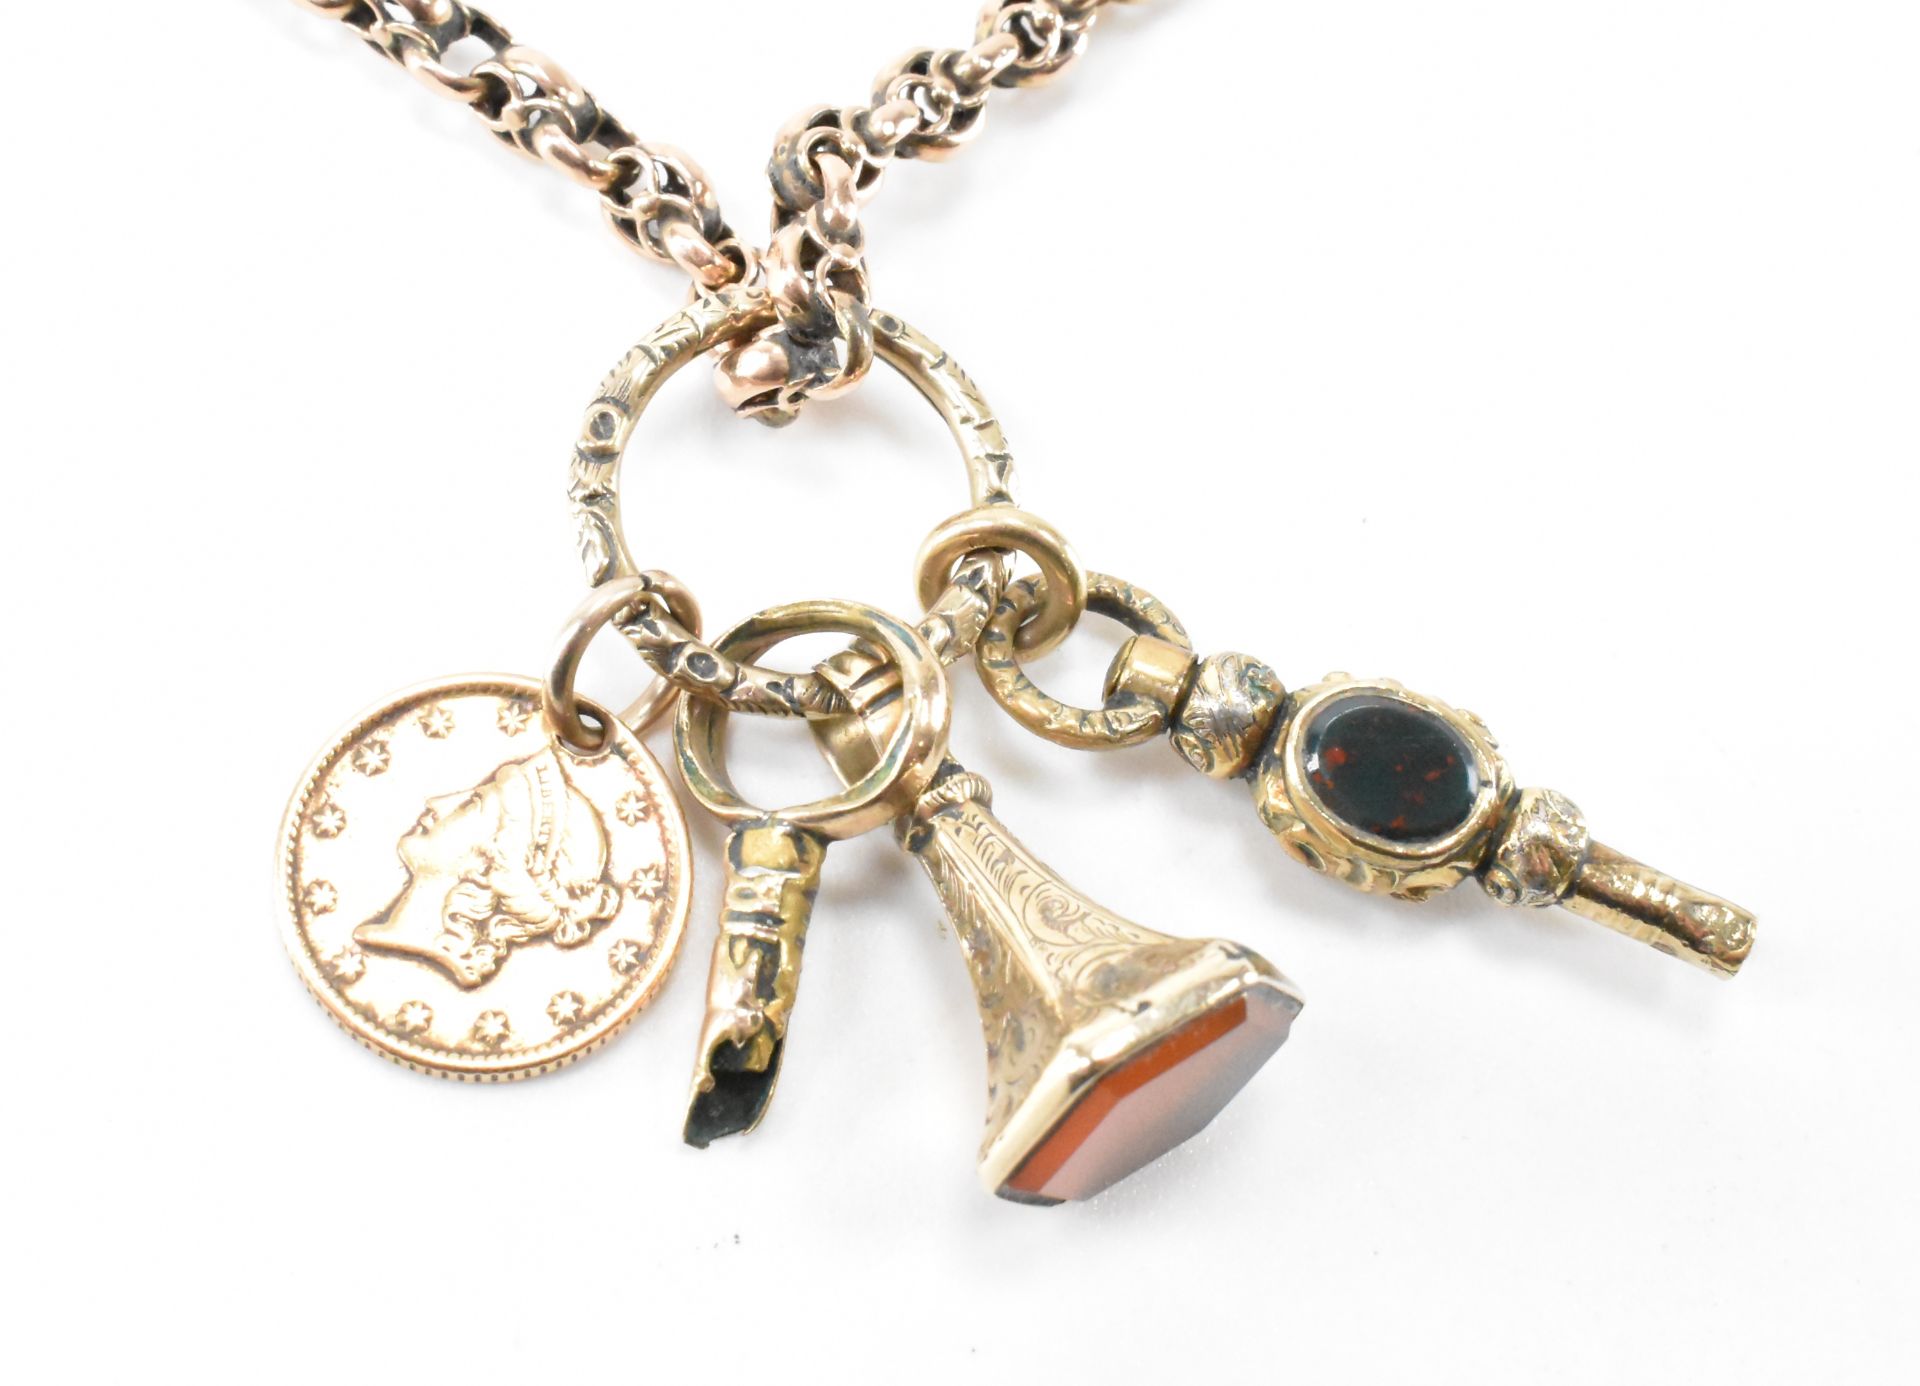 VICTORIAN POCKET WATCH CHAIN NECKLACE - Image 4 of 6